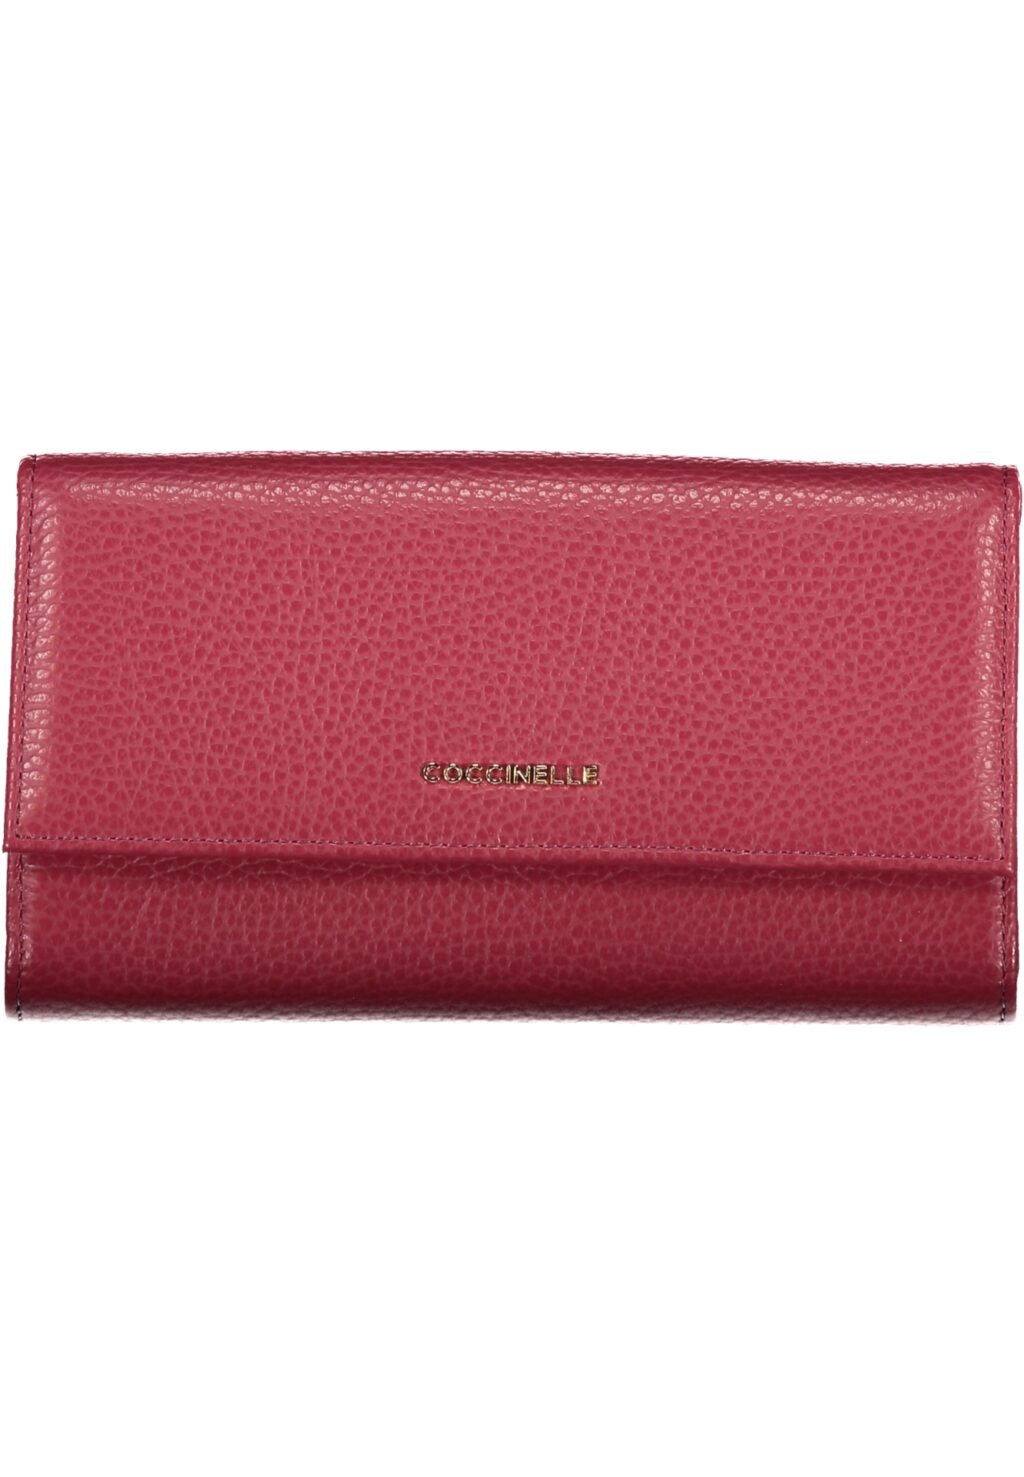 COCCINELLE WOMEN'S WALLET RED E2MW5118501_ROR77